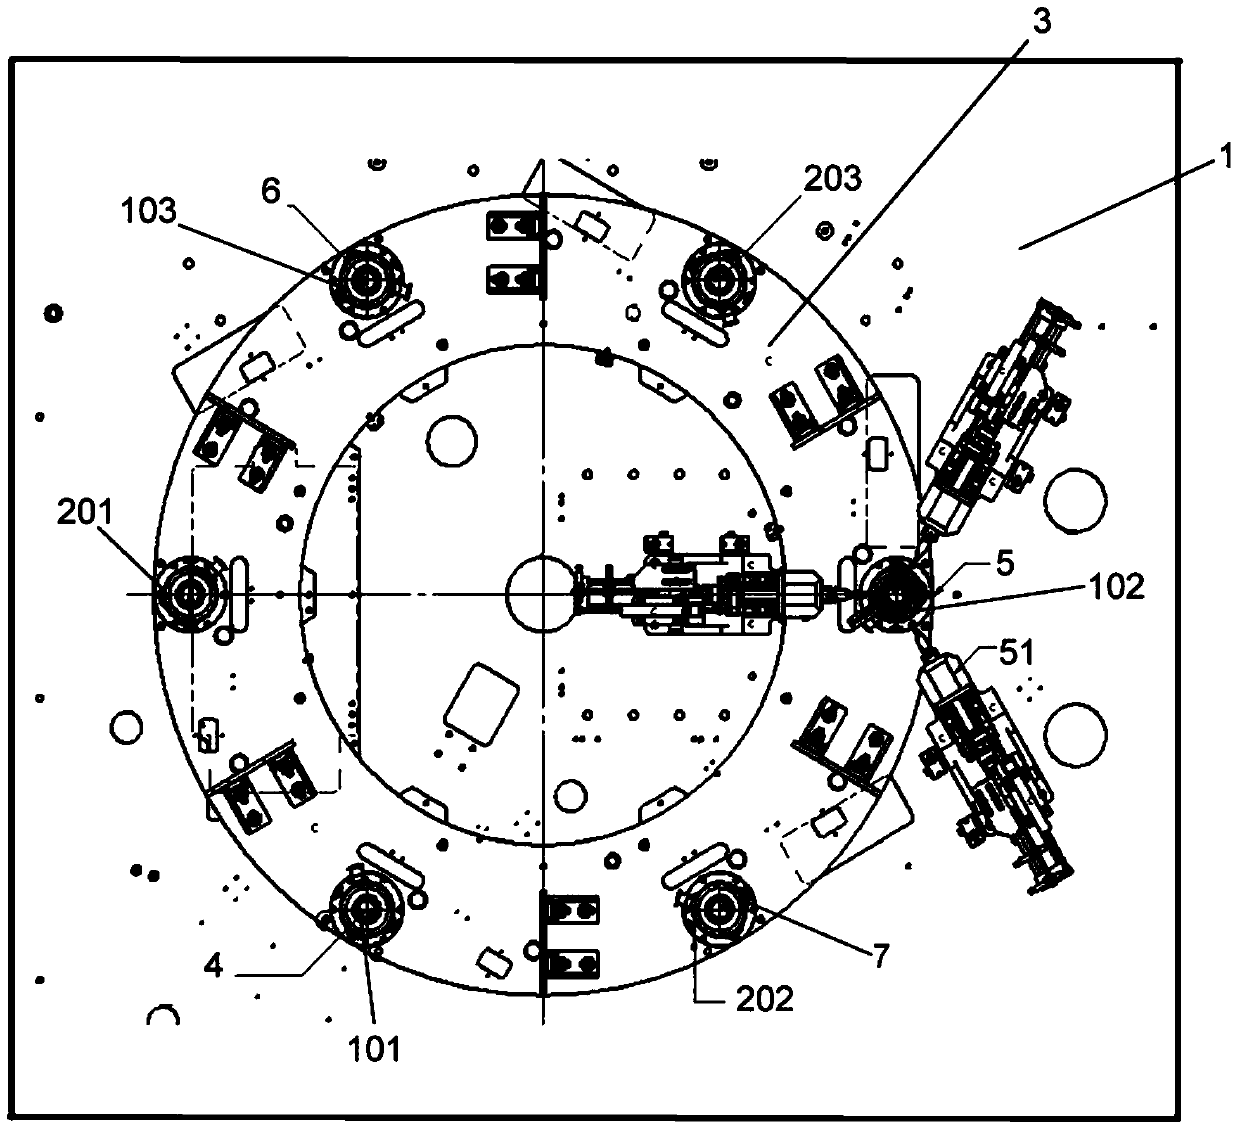 Multi-station assembly equipment for assembling vehicle components